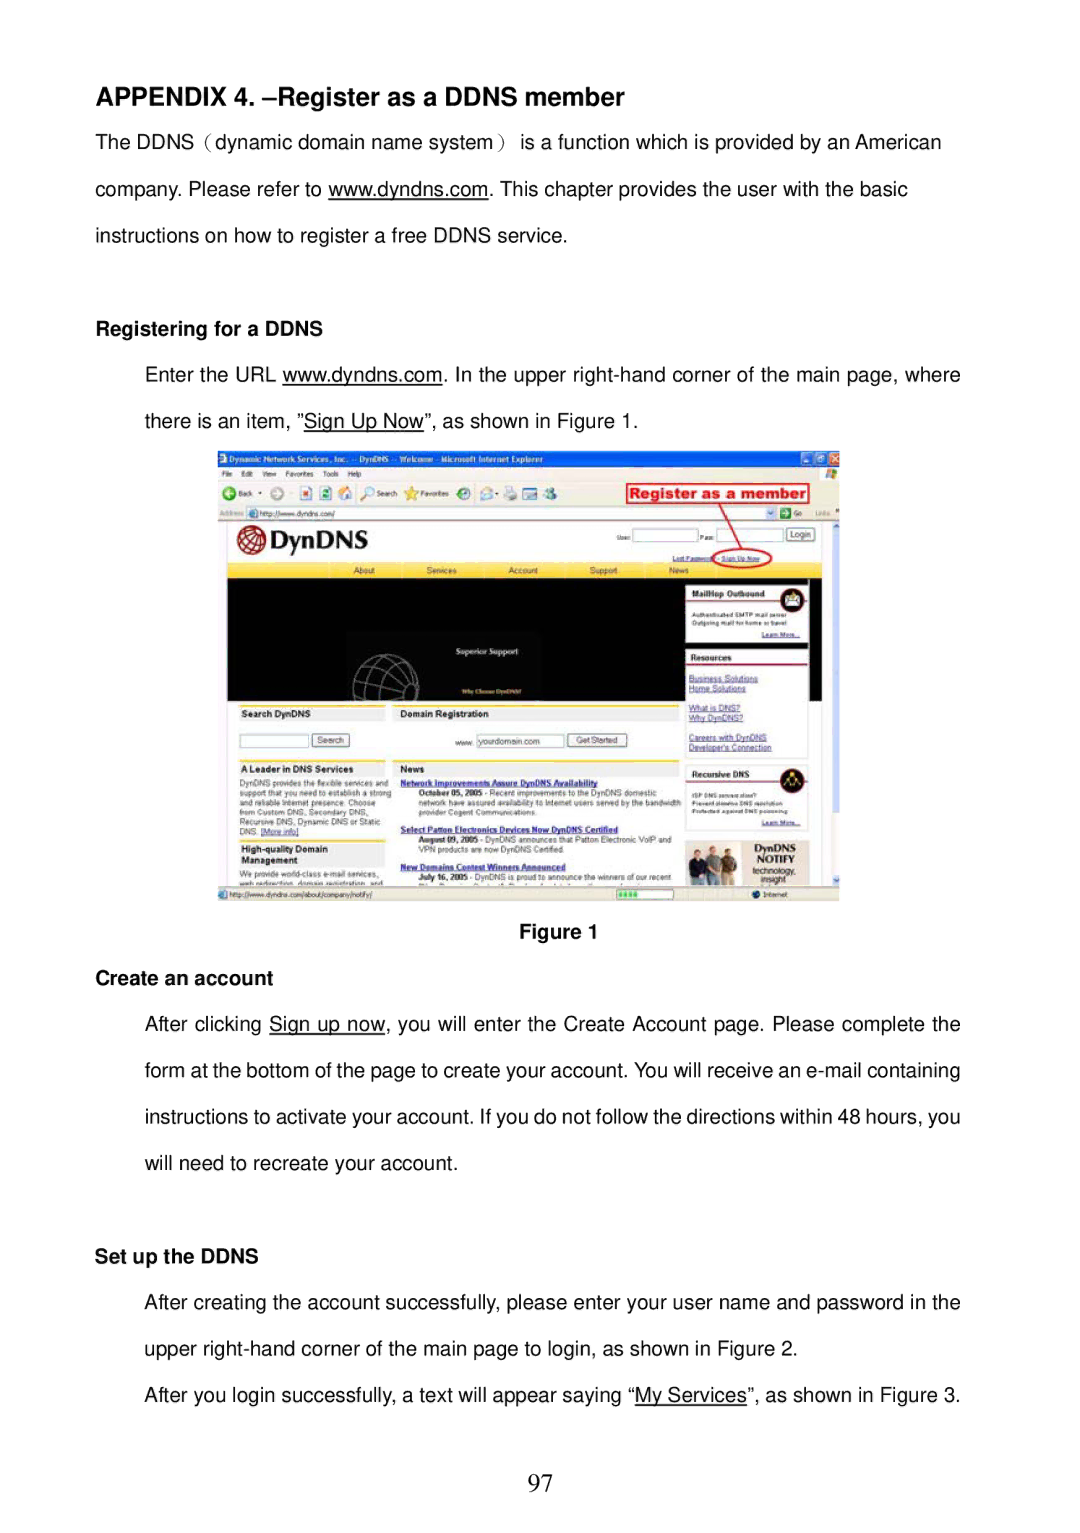 Sony MPEG4 LAN Camera operation manual Registering for a Ddns Create an account, Set up the Ddns 